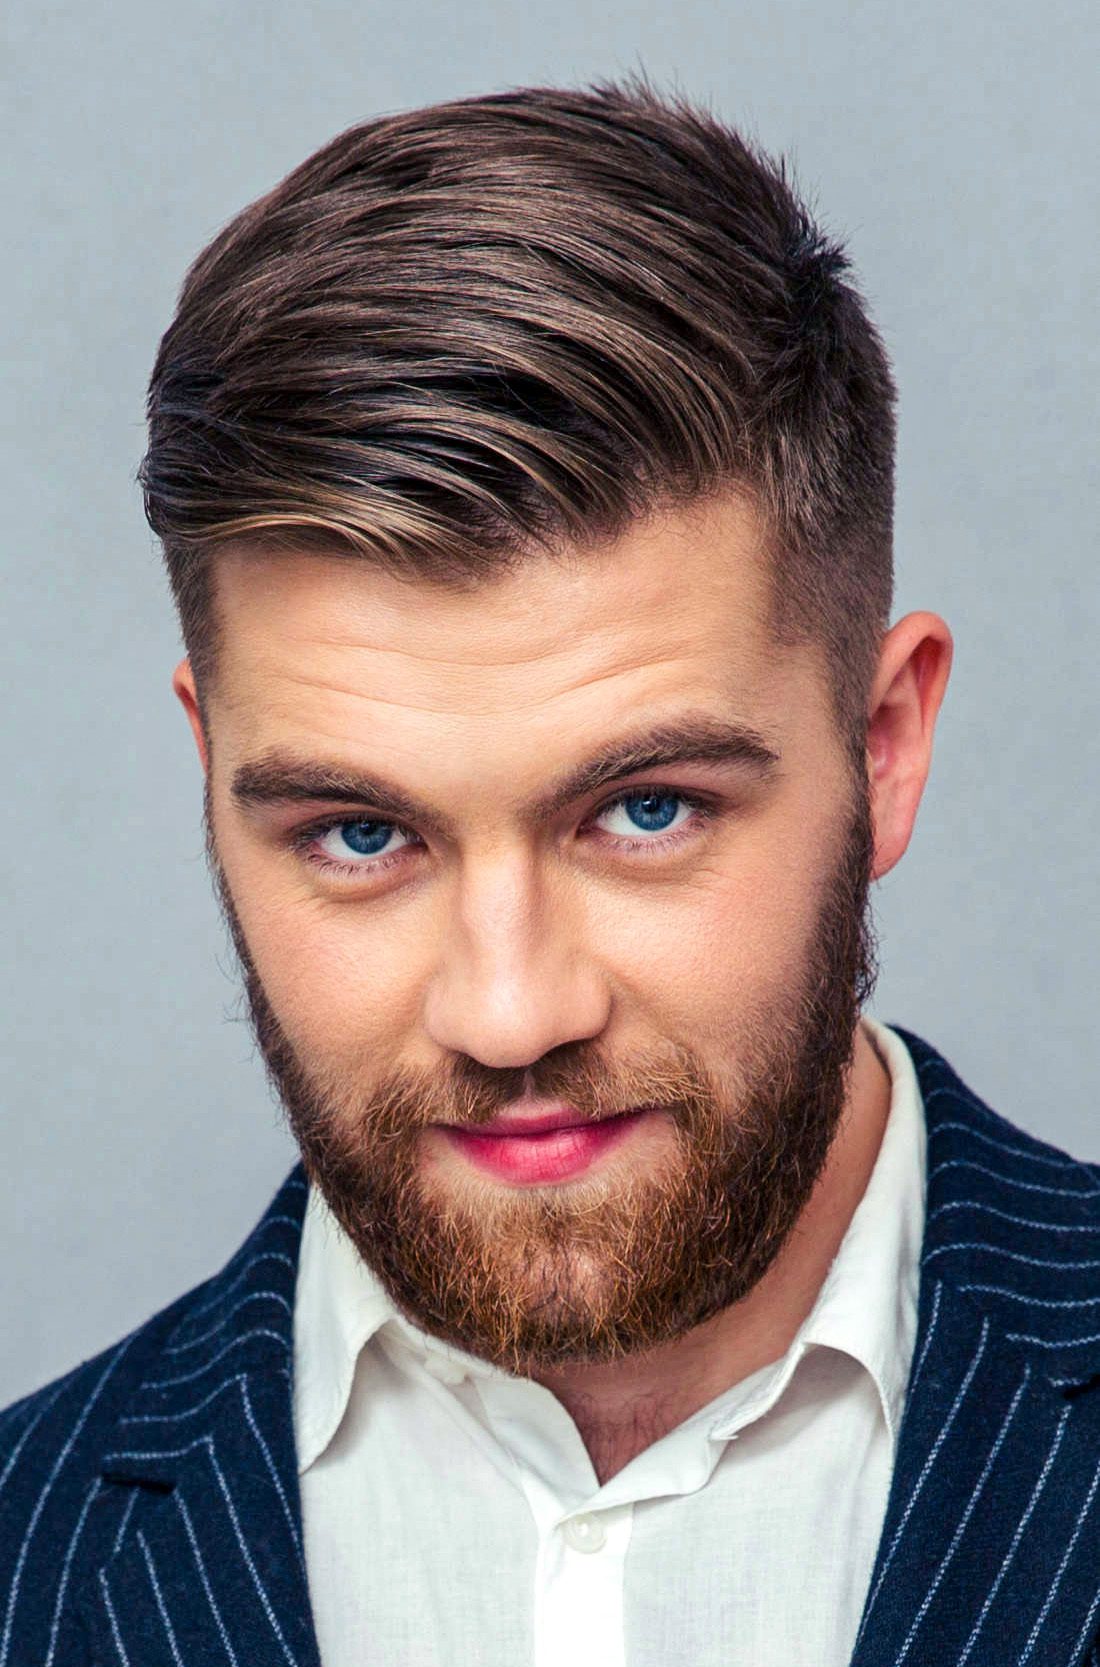 CLASSIC HAIRSTYLES FOR SIMPLE MEN - Barber Caves-smartinvestplan.com